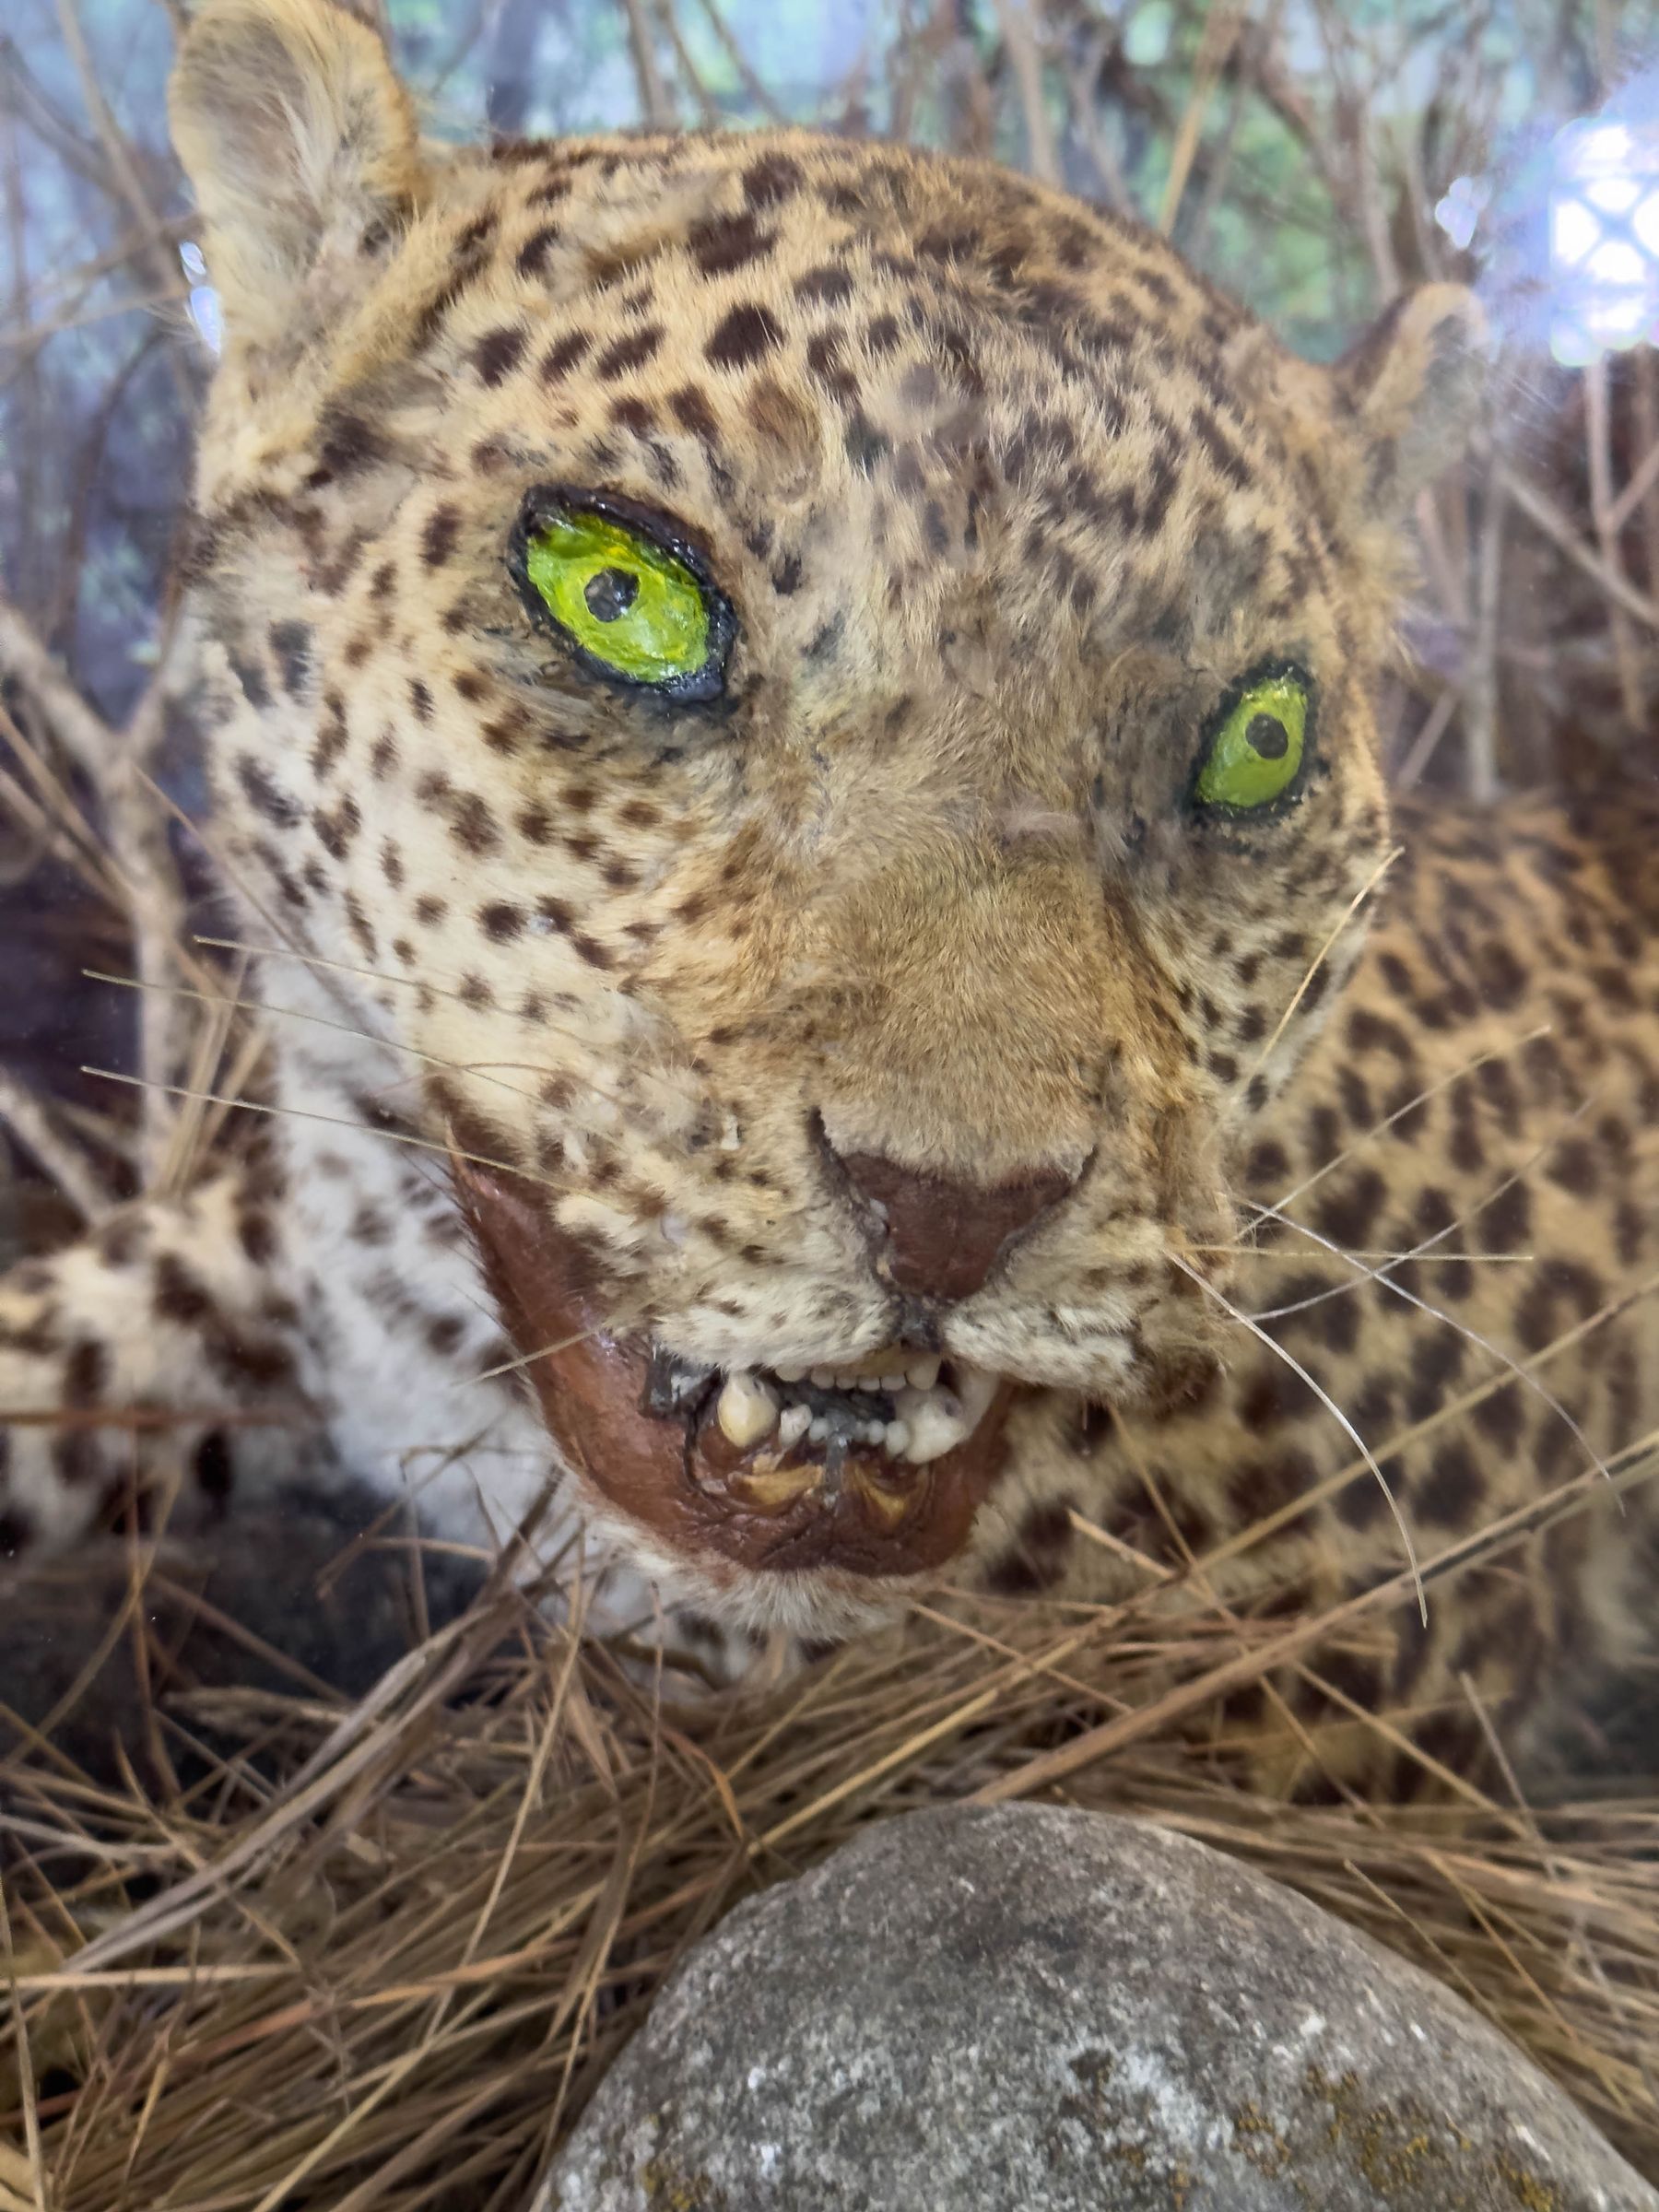 A Taxidermy Highlight: Leopard with Super Realistic Yellow Eyes